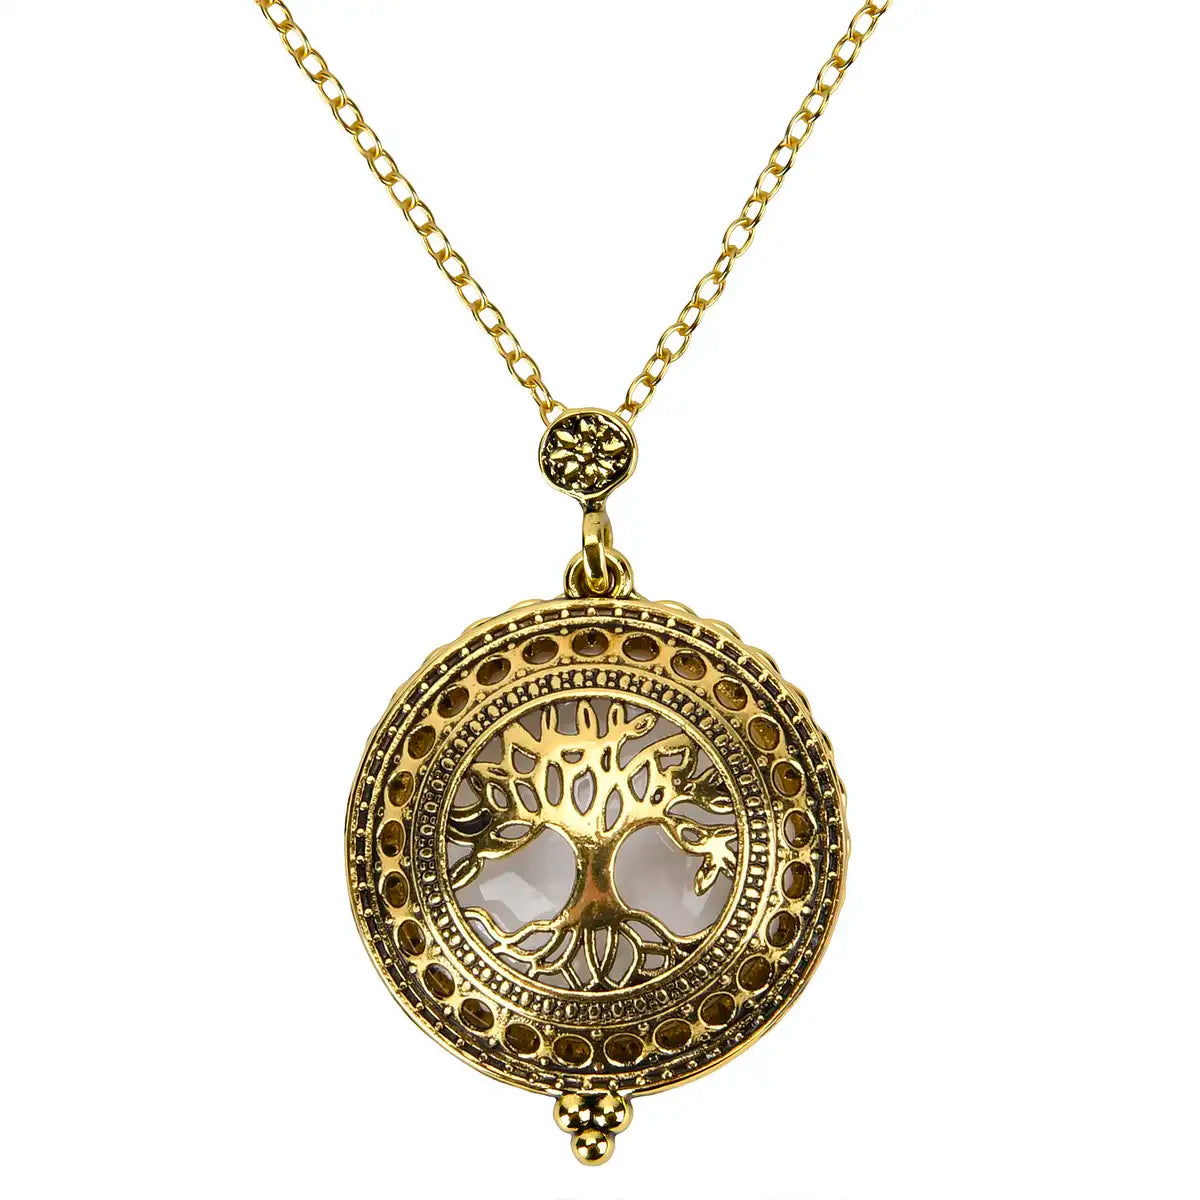 Vintage Hollow-Out Necklace 36 Inches with 5X Magnifying Lens